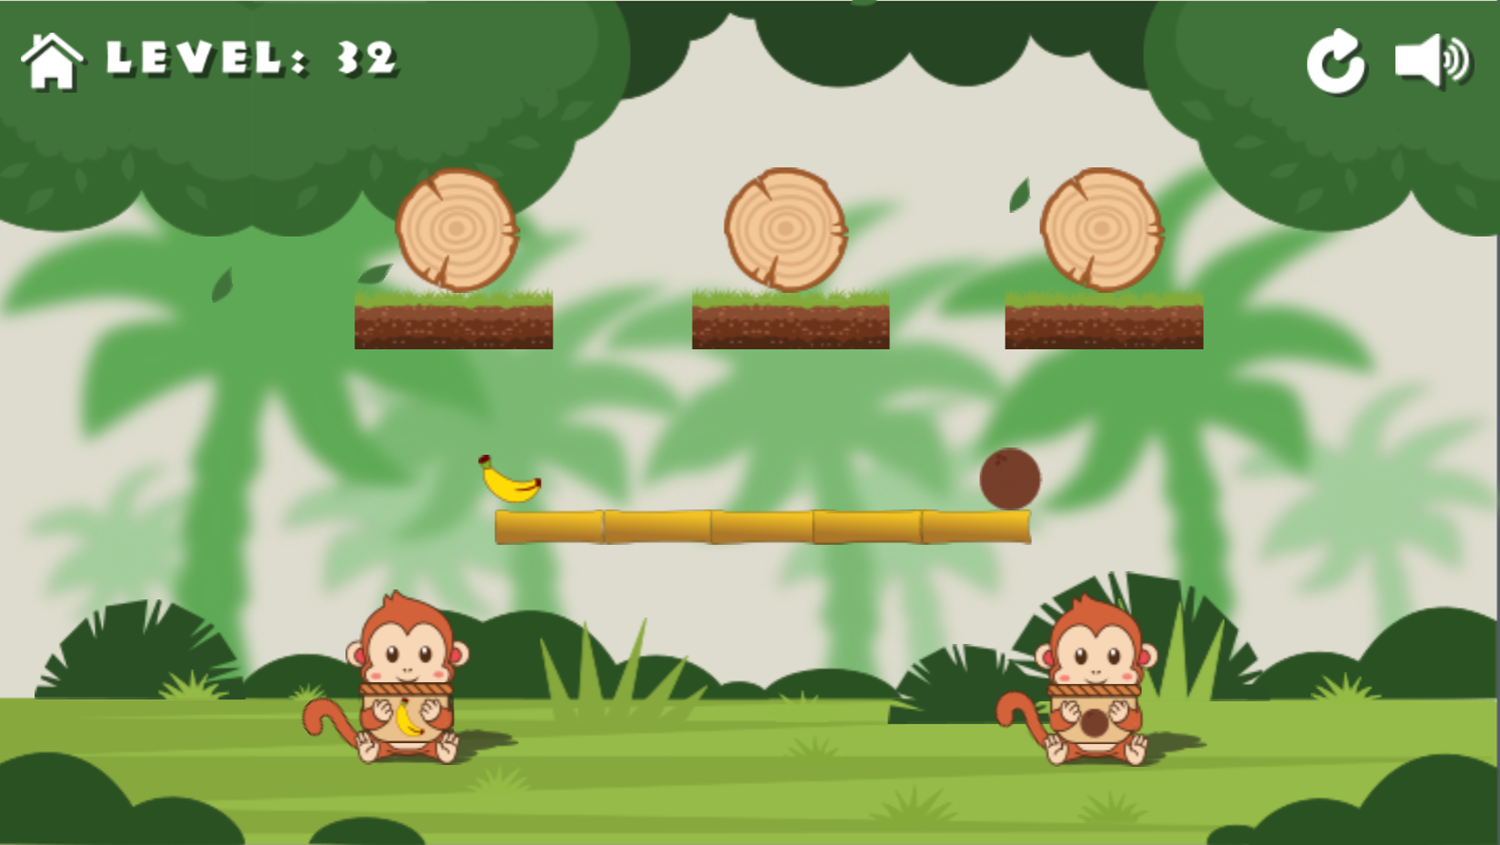 Monkeys and Fruits Game Level Where Players Move Fruits Both Ways Screenshot.